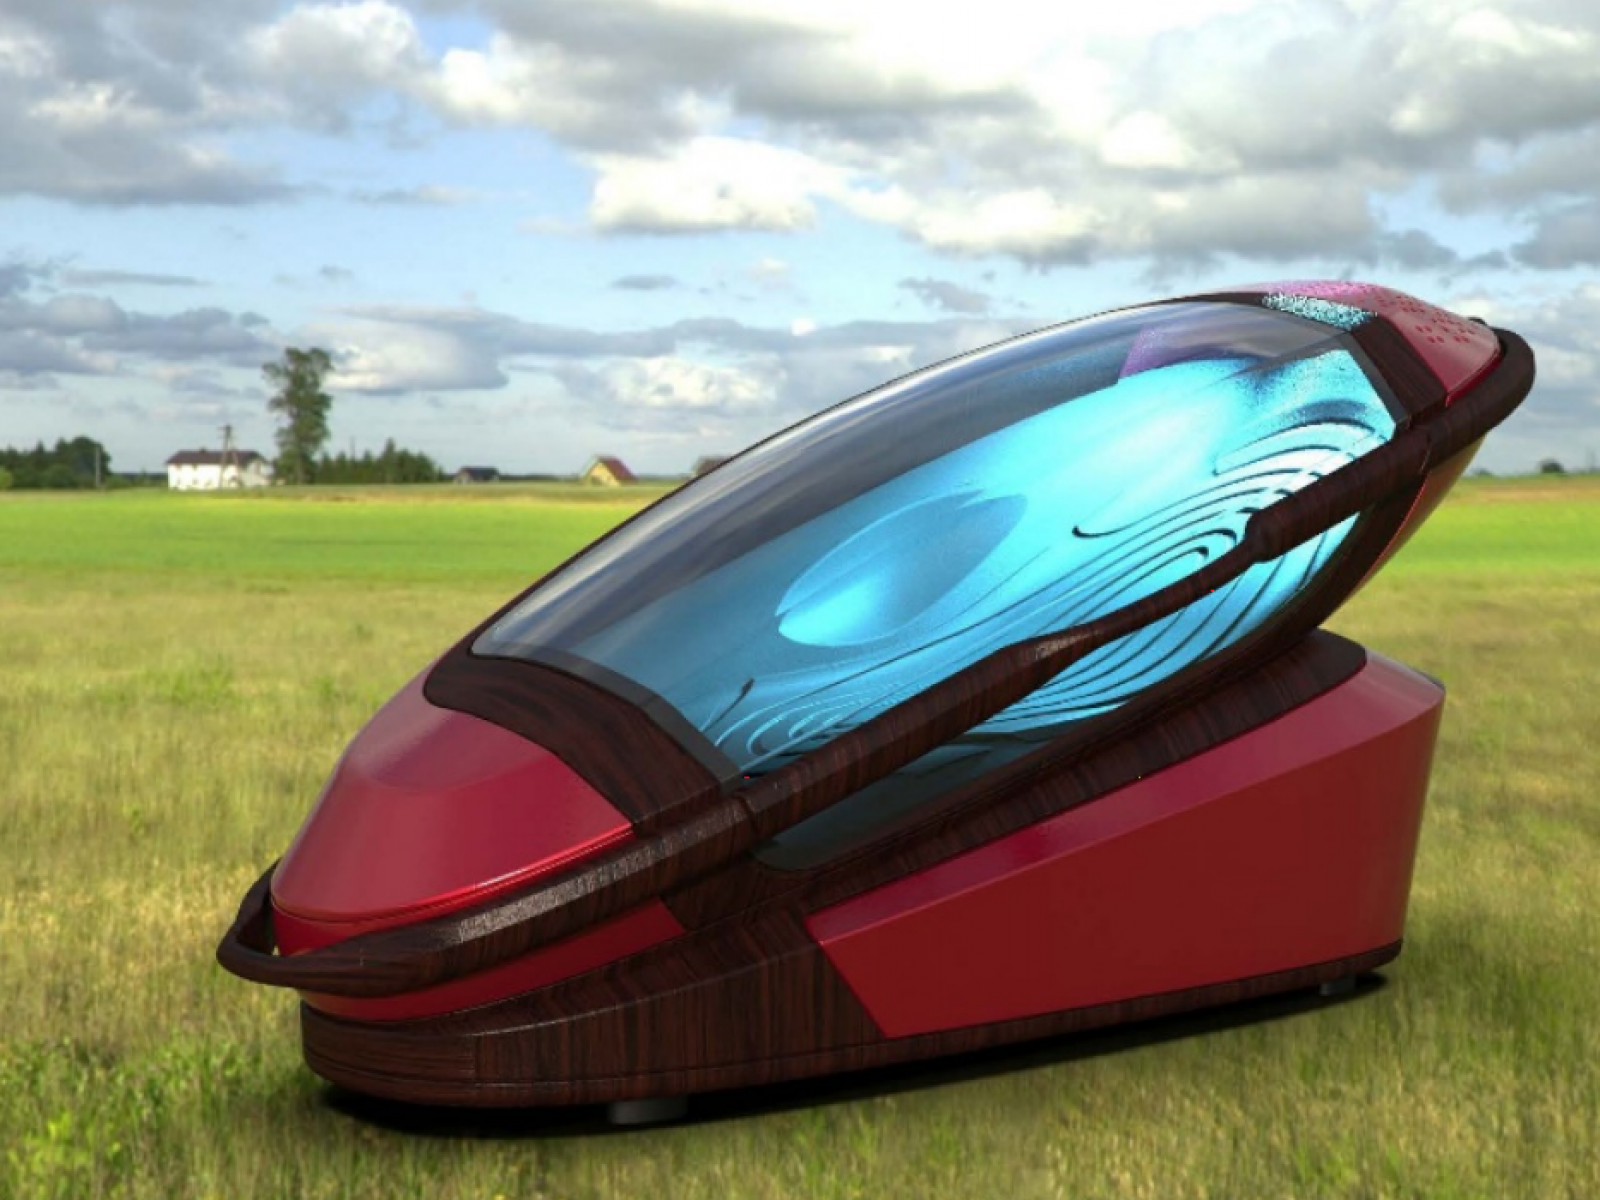 Suicide Machine: &#39;Sarco&#39; Death Pod That Lets Users Kill Themselves Showcased